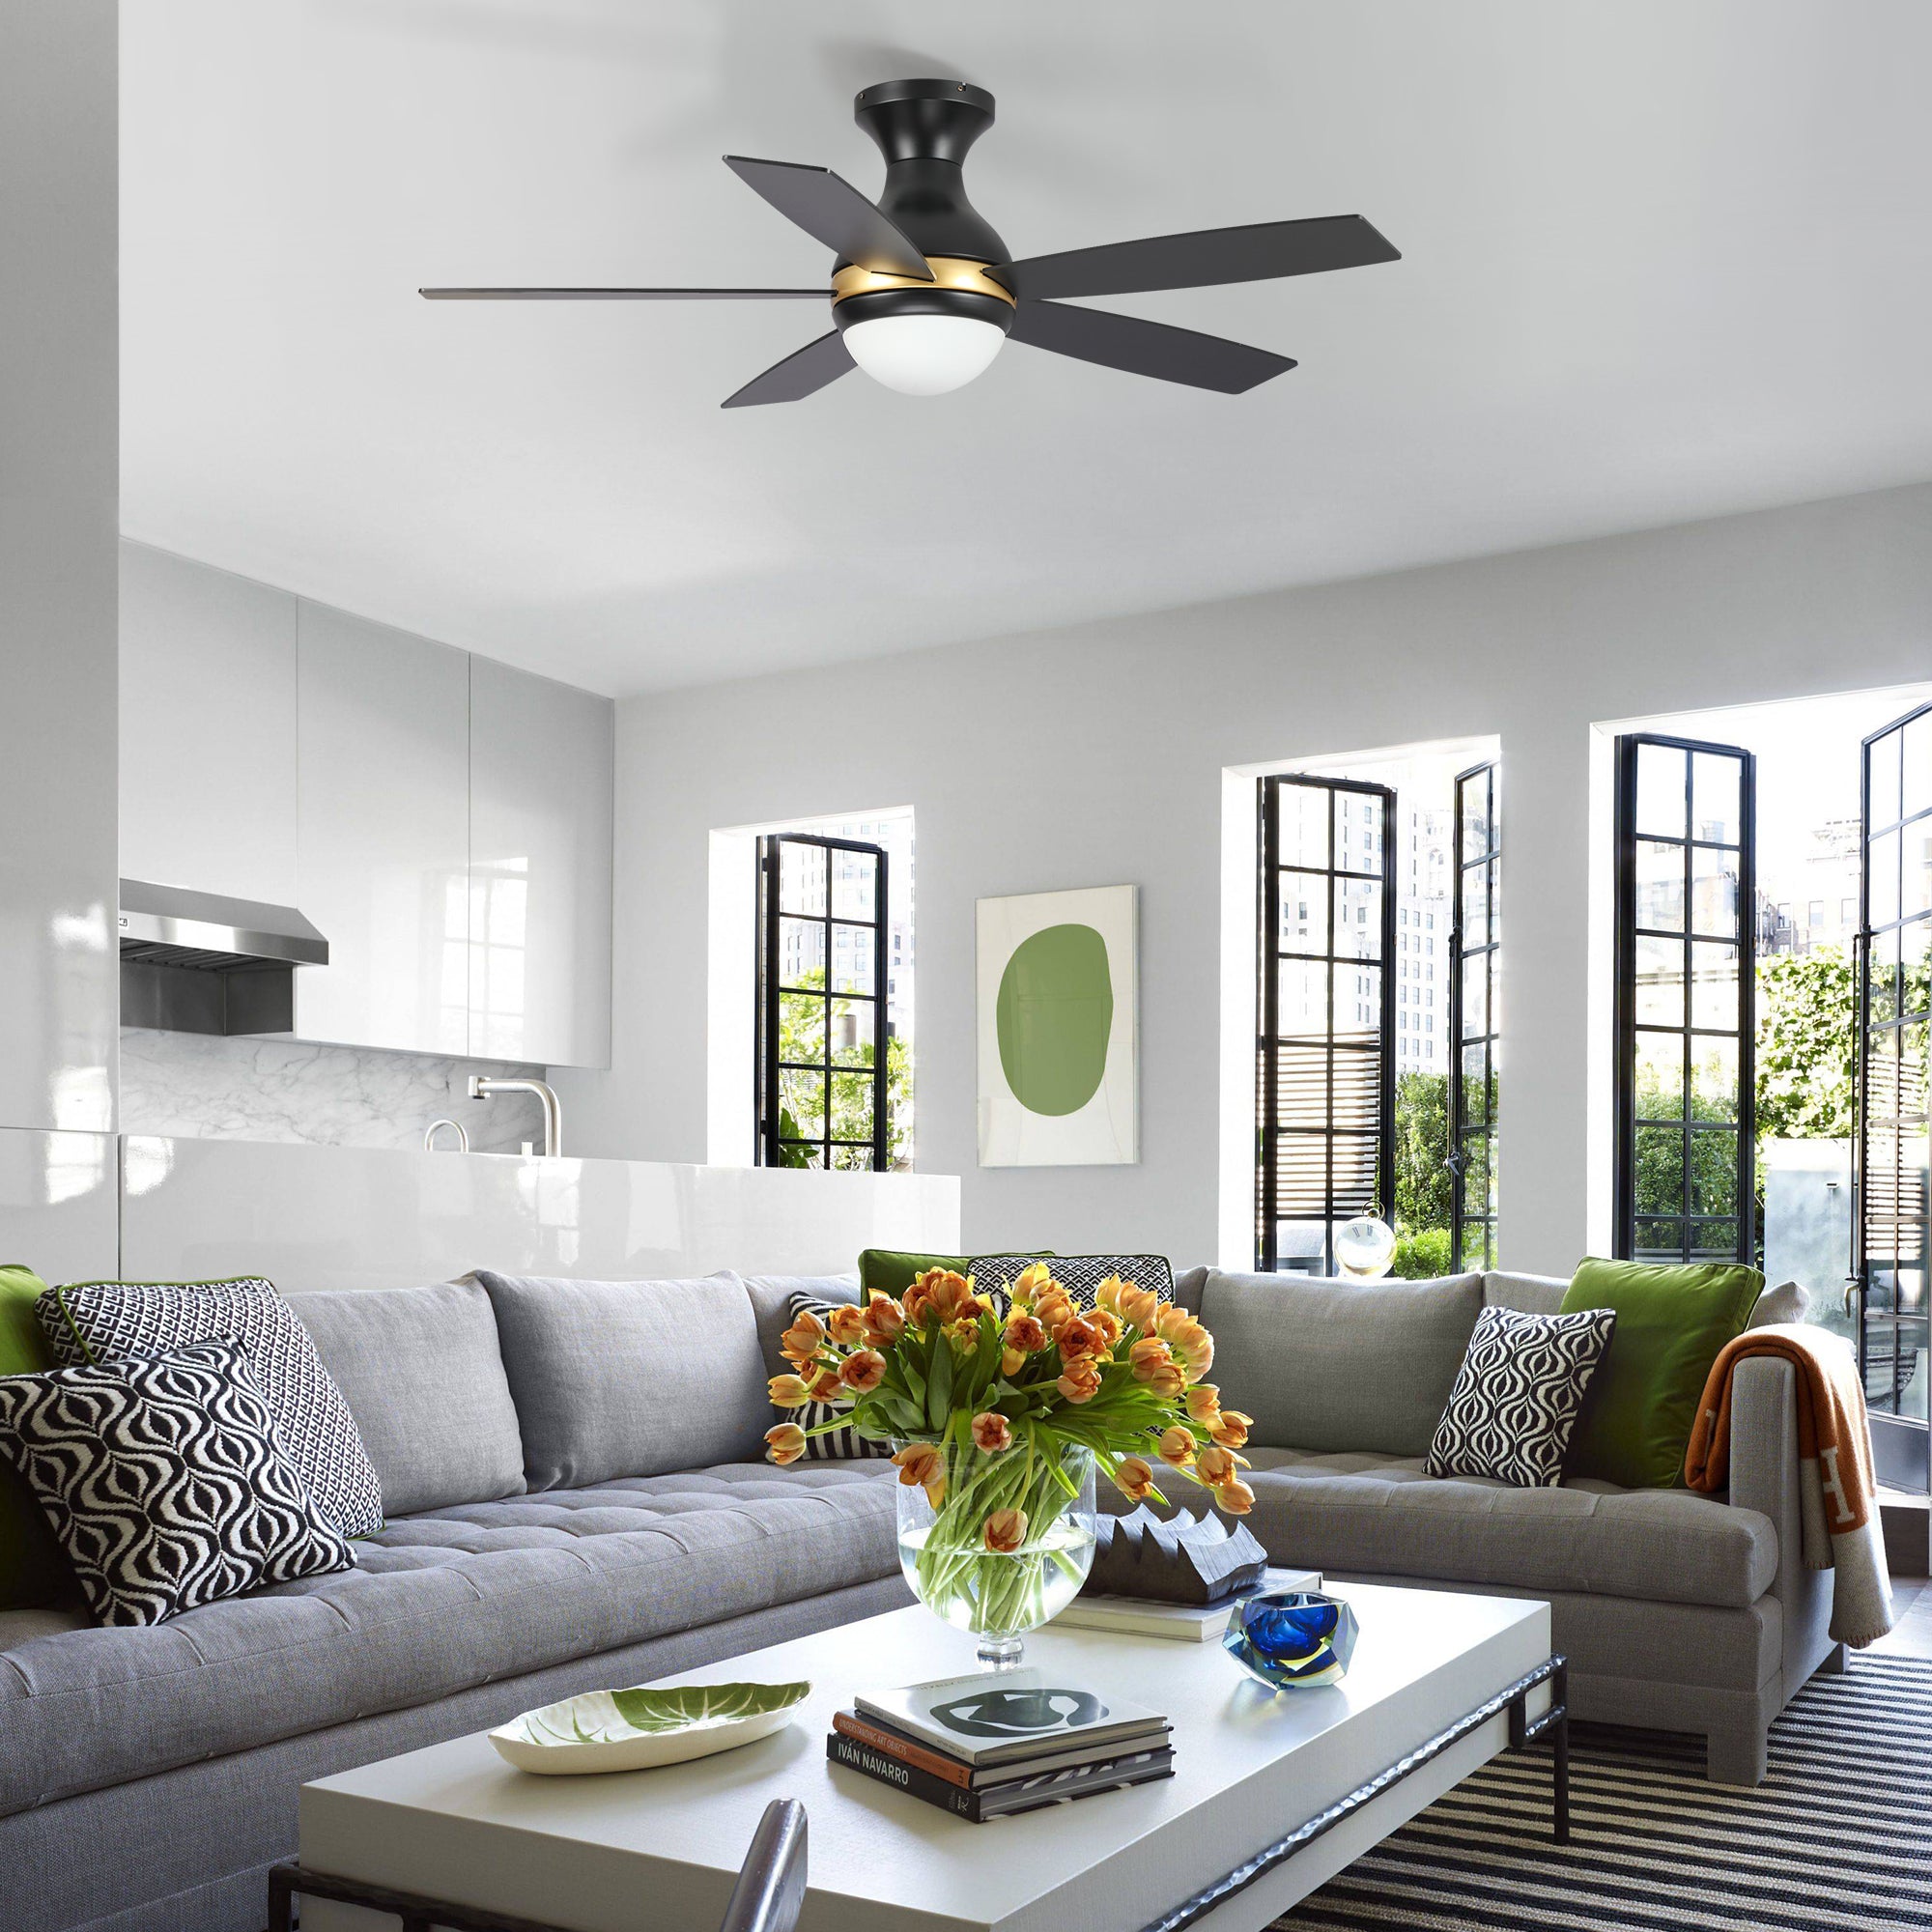 This Fannin 52&#39;&#39; smart ceiling fan keeps your space cool, bright, and stylish. It is a soft modern masterpiece perfect for your large indoor living spaces. This Wifi smart ceiling fan is a simplicity designing with White finish, use elegant Plywood blades and has an integrated 4000K LED cool light. The fan features Remote control, Wi-Fi apps, Siri Shortcut and Voice control technology (compatible with Amazon Alexa and Google Home Assistant ) to set fan preferences.